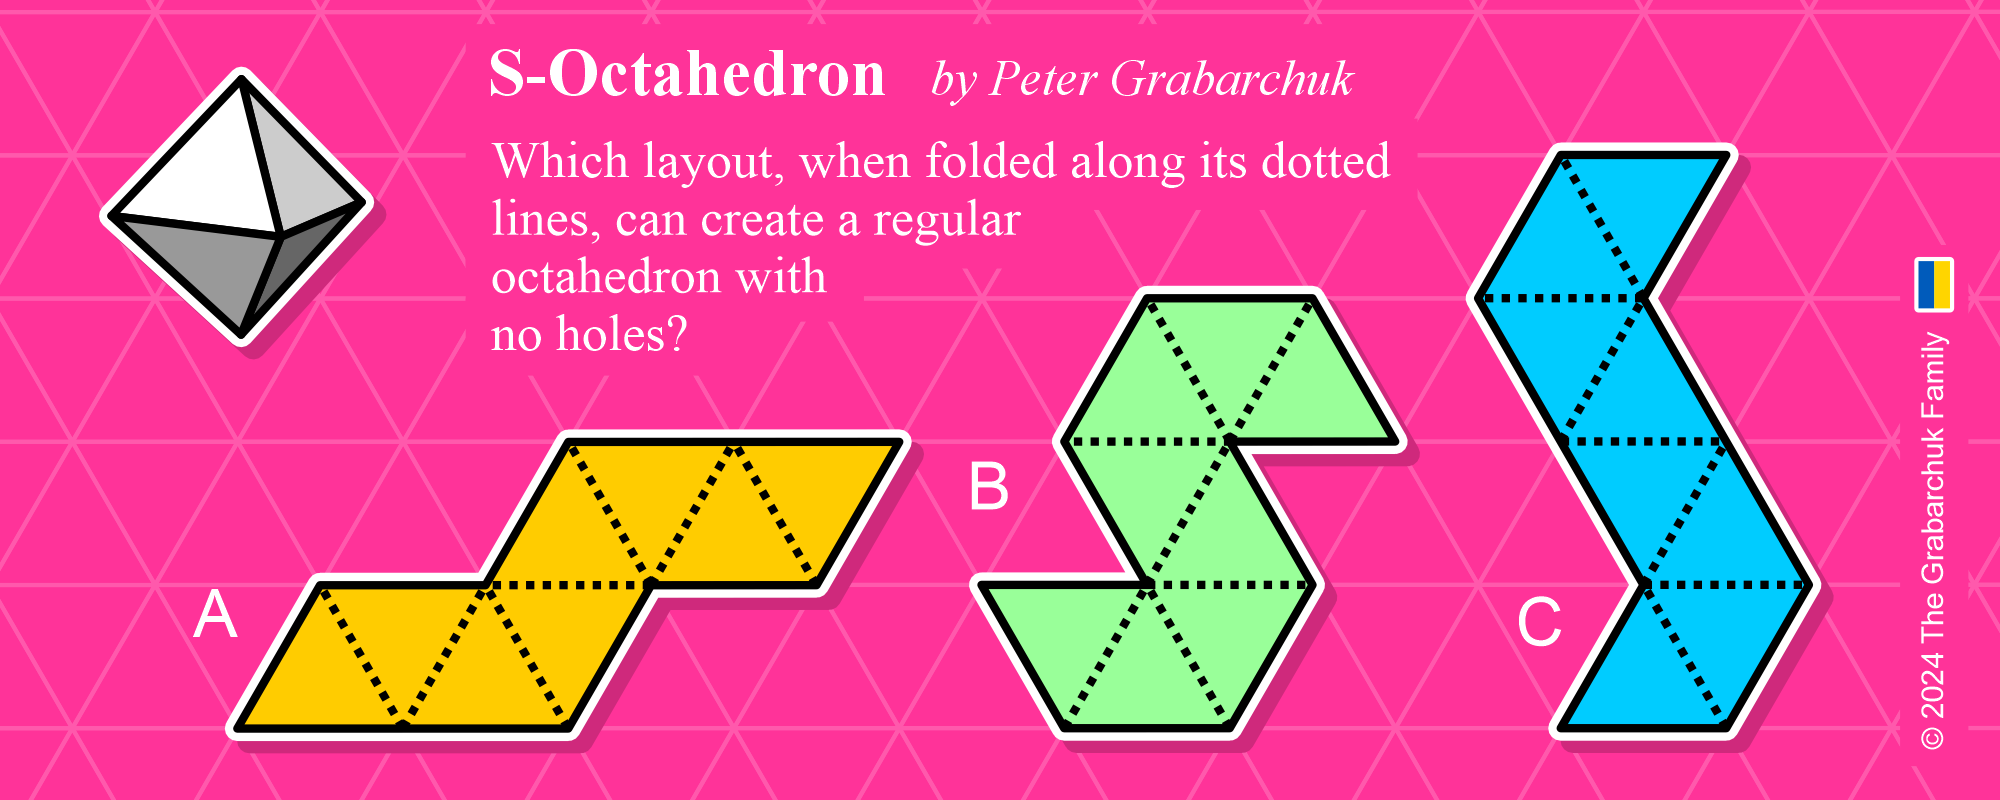 S-Octahedron by Peter Grabarchuk